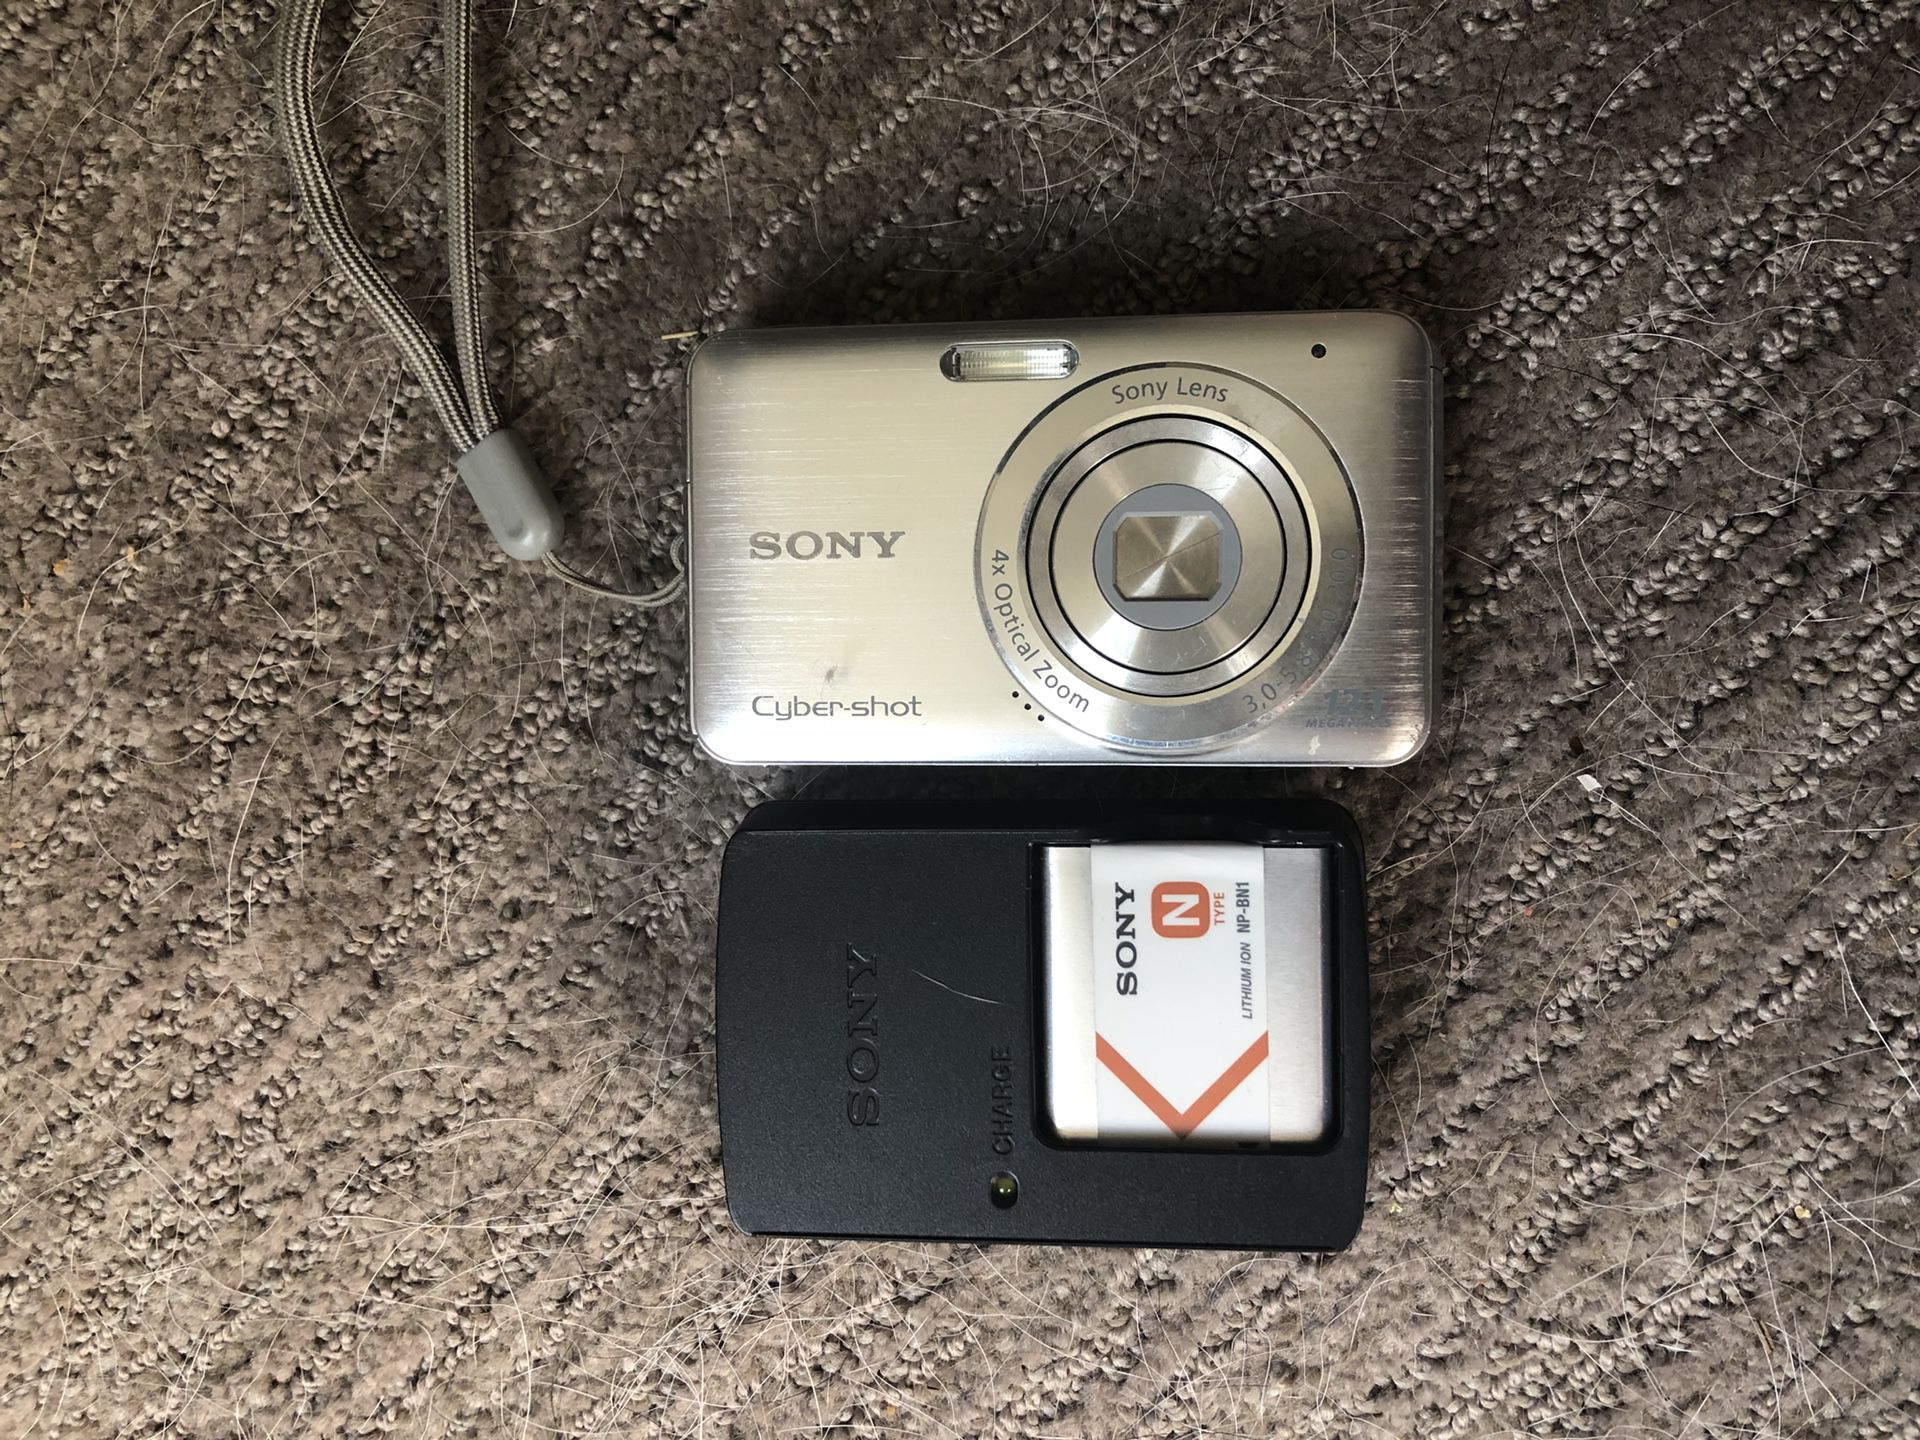 Sony Cyber-shot 12.1 MP Digital Camera - w/ Battery, Charger & SD Card